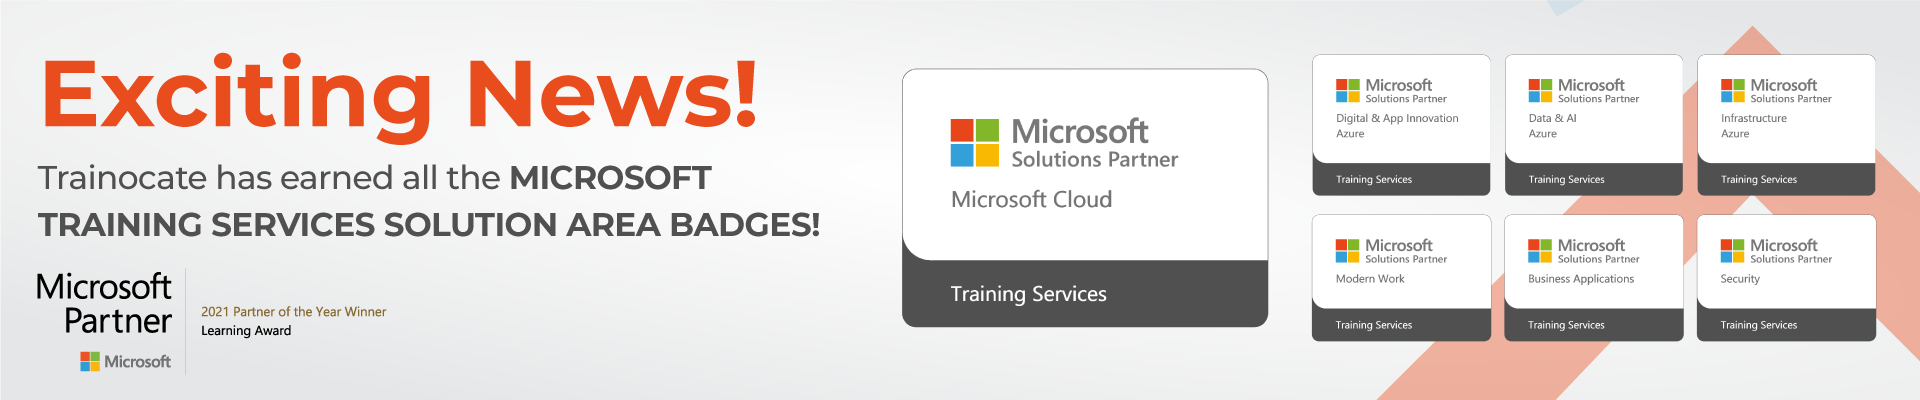 trainocate-earns-ms-service-solution-badges.png